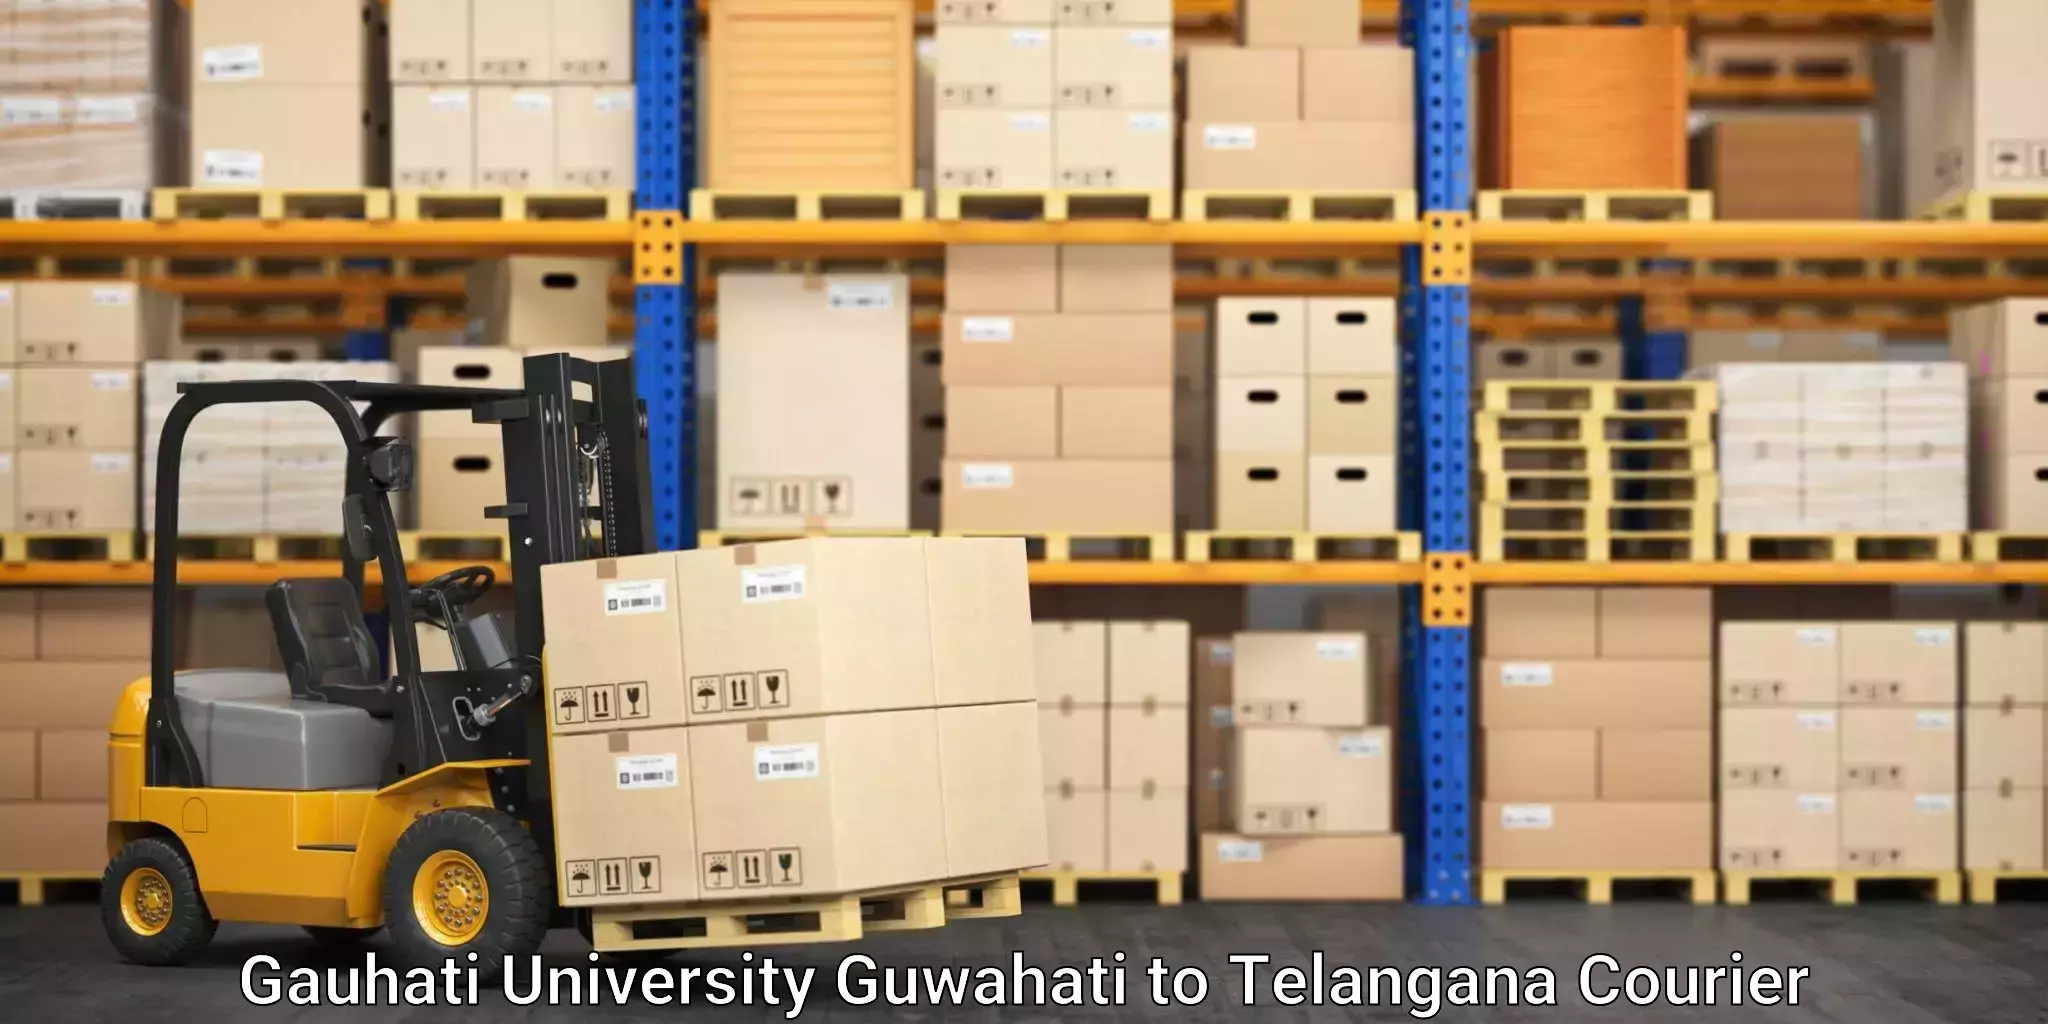 Reliable courier services Gauhati University Guwahati to Bodhan